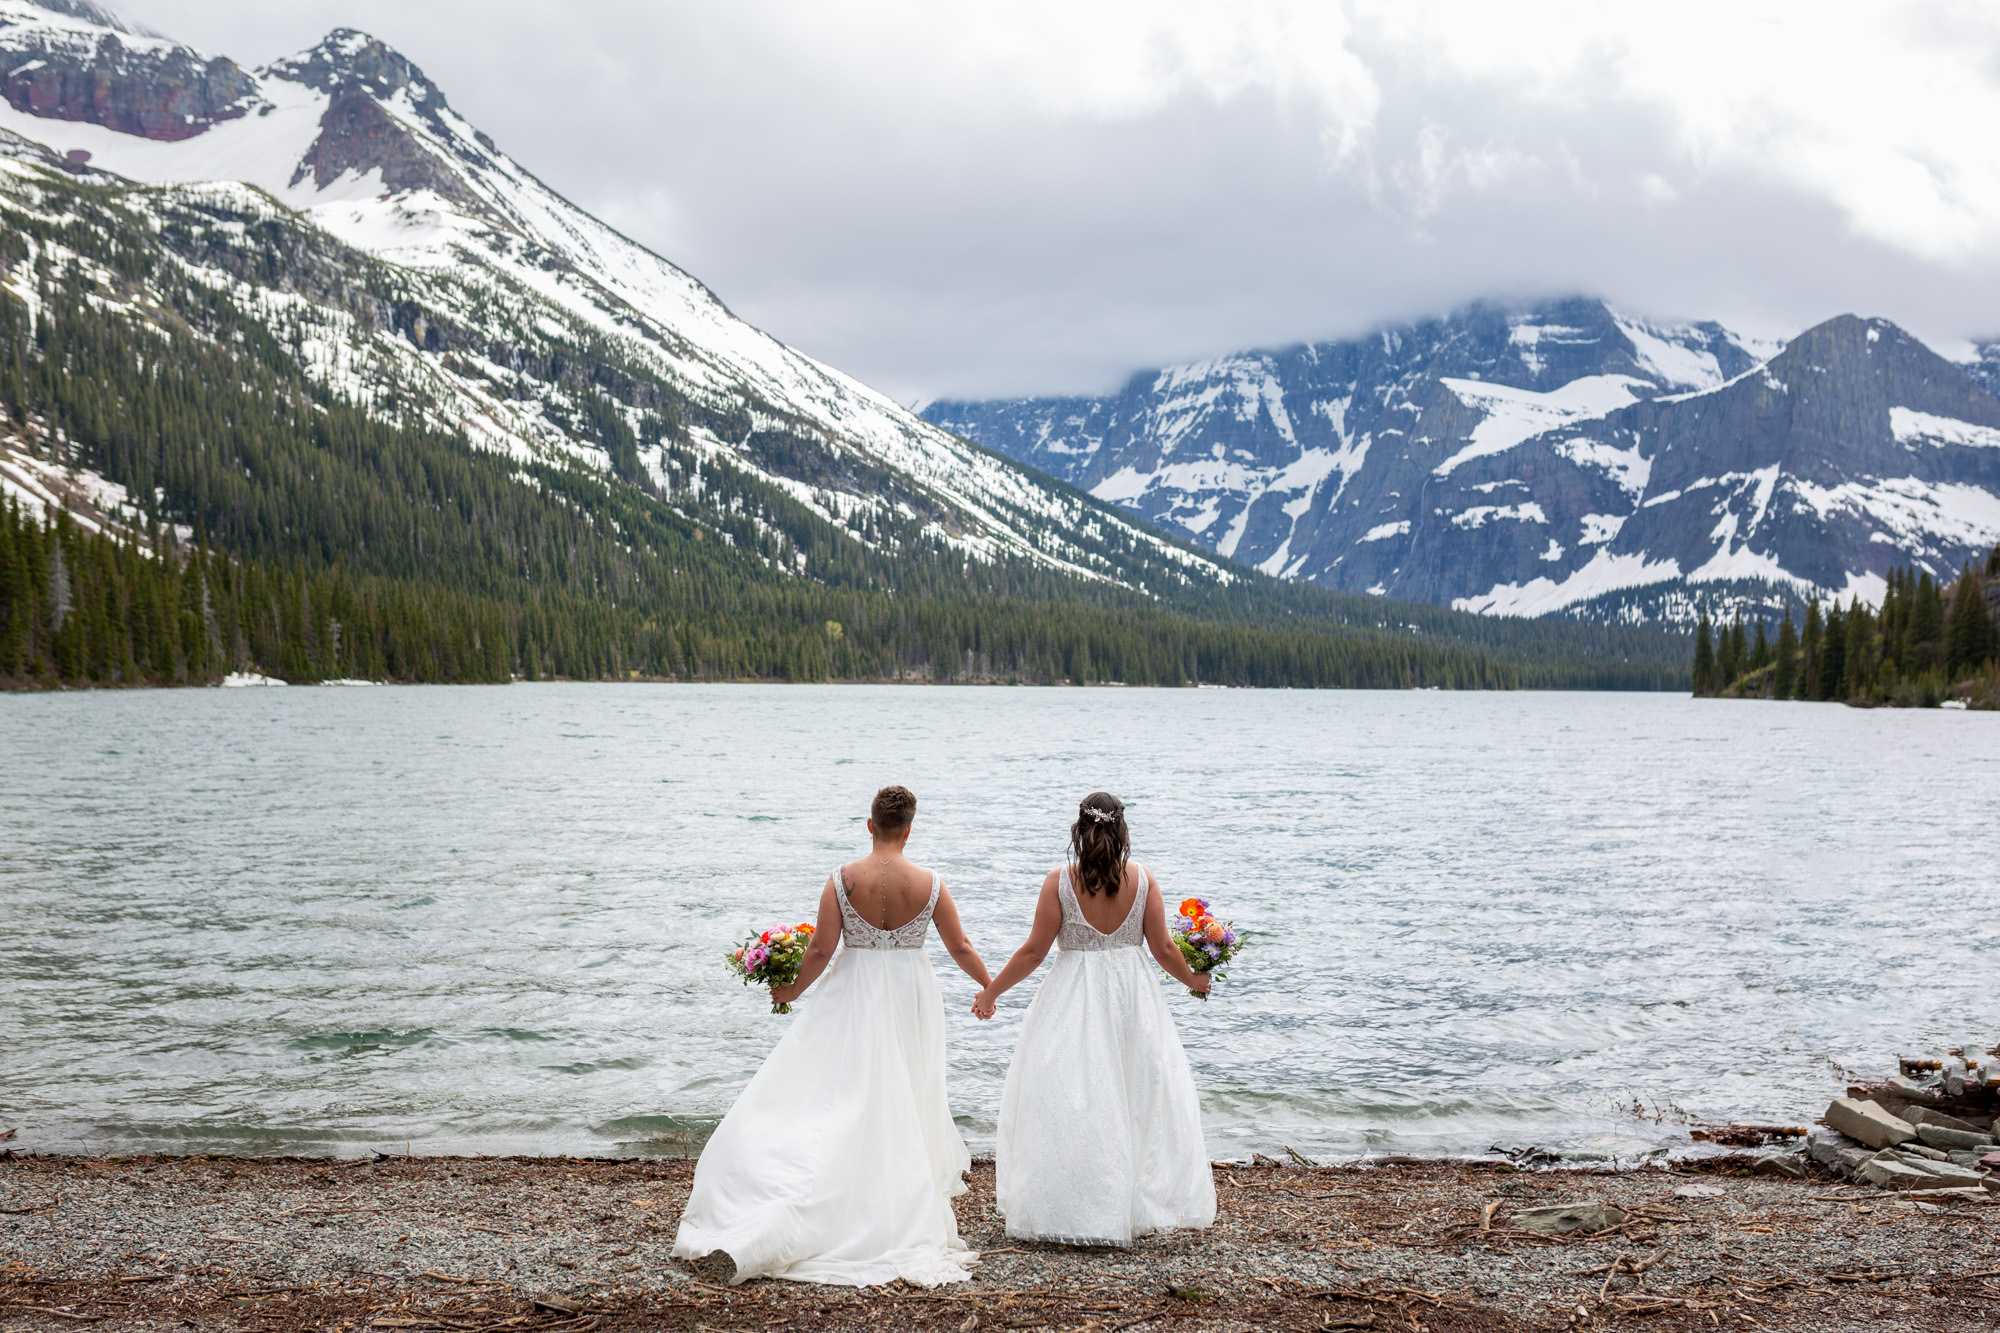 Two brides stand holding hands on the shoreline of Lake Josephine in Glacier National Park.